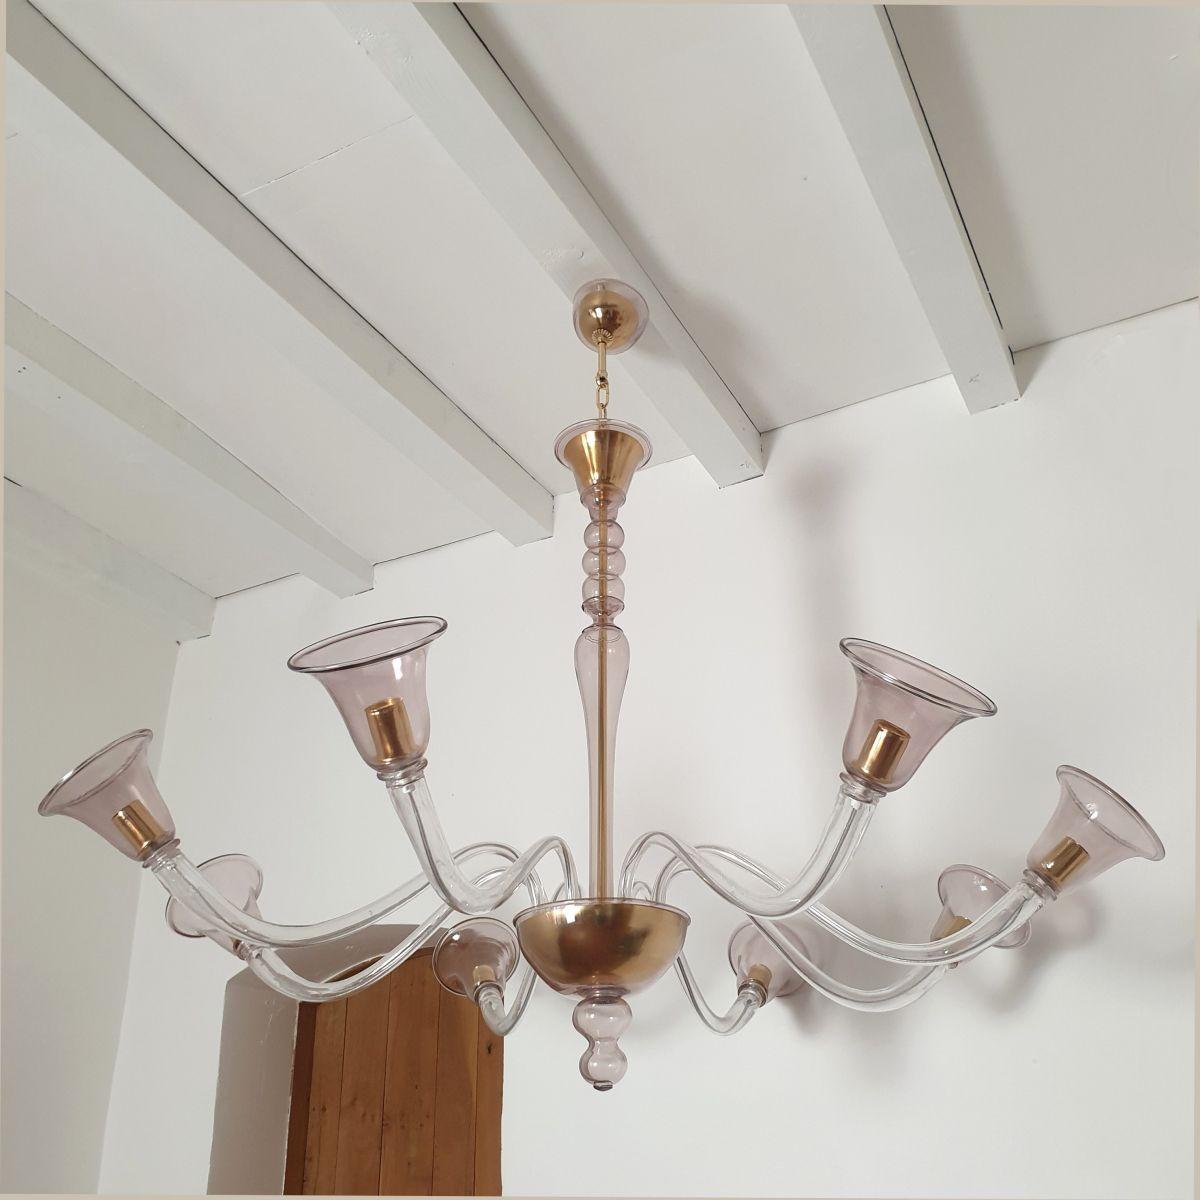 Large Mid-Century Modern Murano glass chandelier, Seguso style, Italy, 1980s.
The hand blown chandelier is made of a thin delicate light purple color Murano glass.
The chandelier has gold plated mounts.
It has a double canopy, with a gold plated